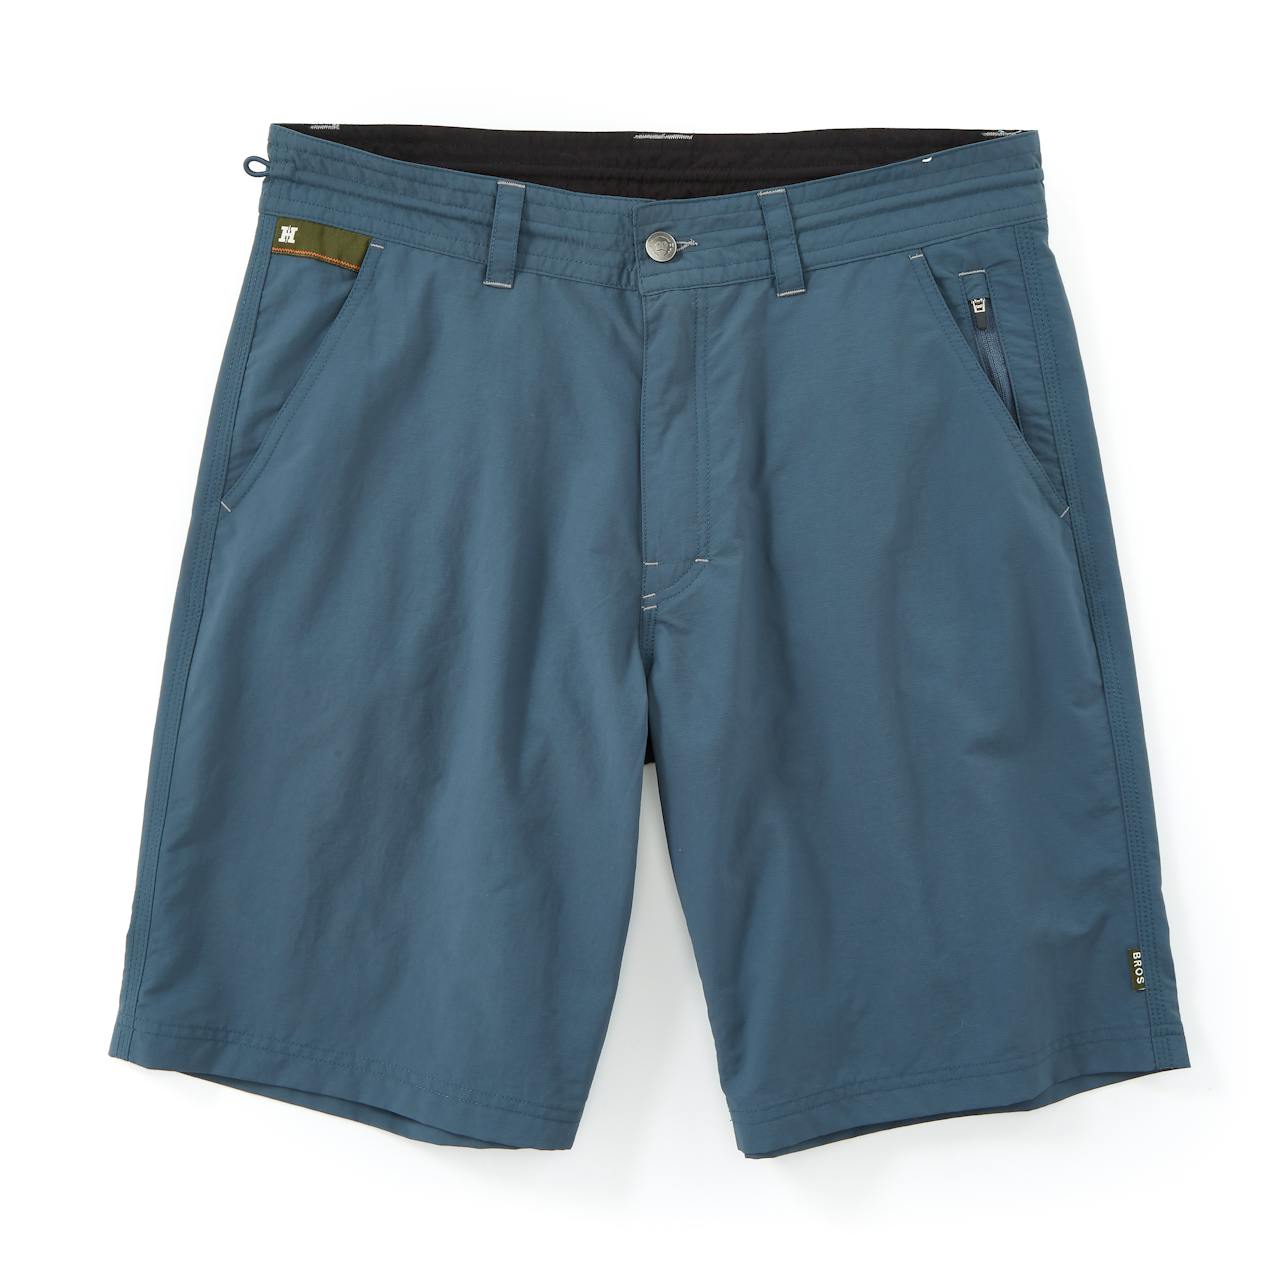 Howler Brothers Horizon Hybrid Shorts 2.0  - Exclusive